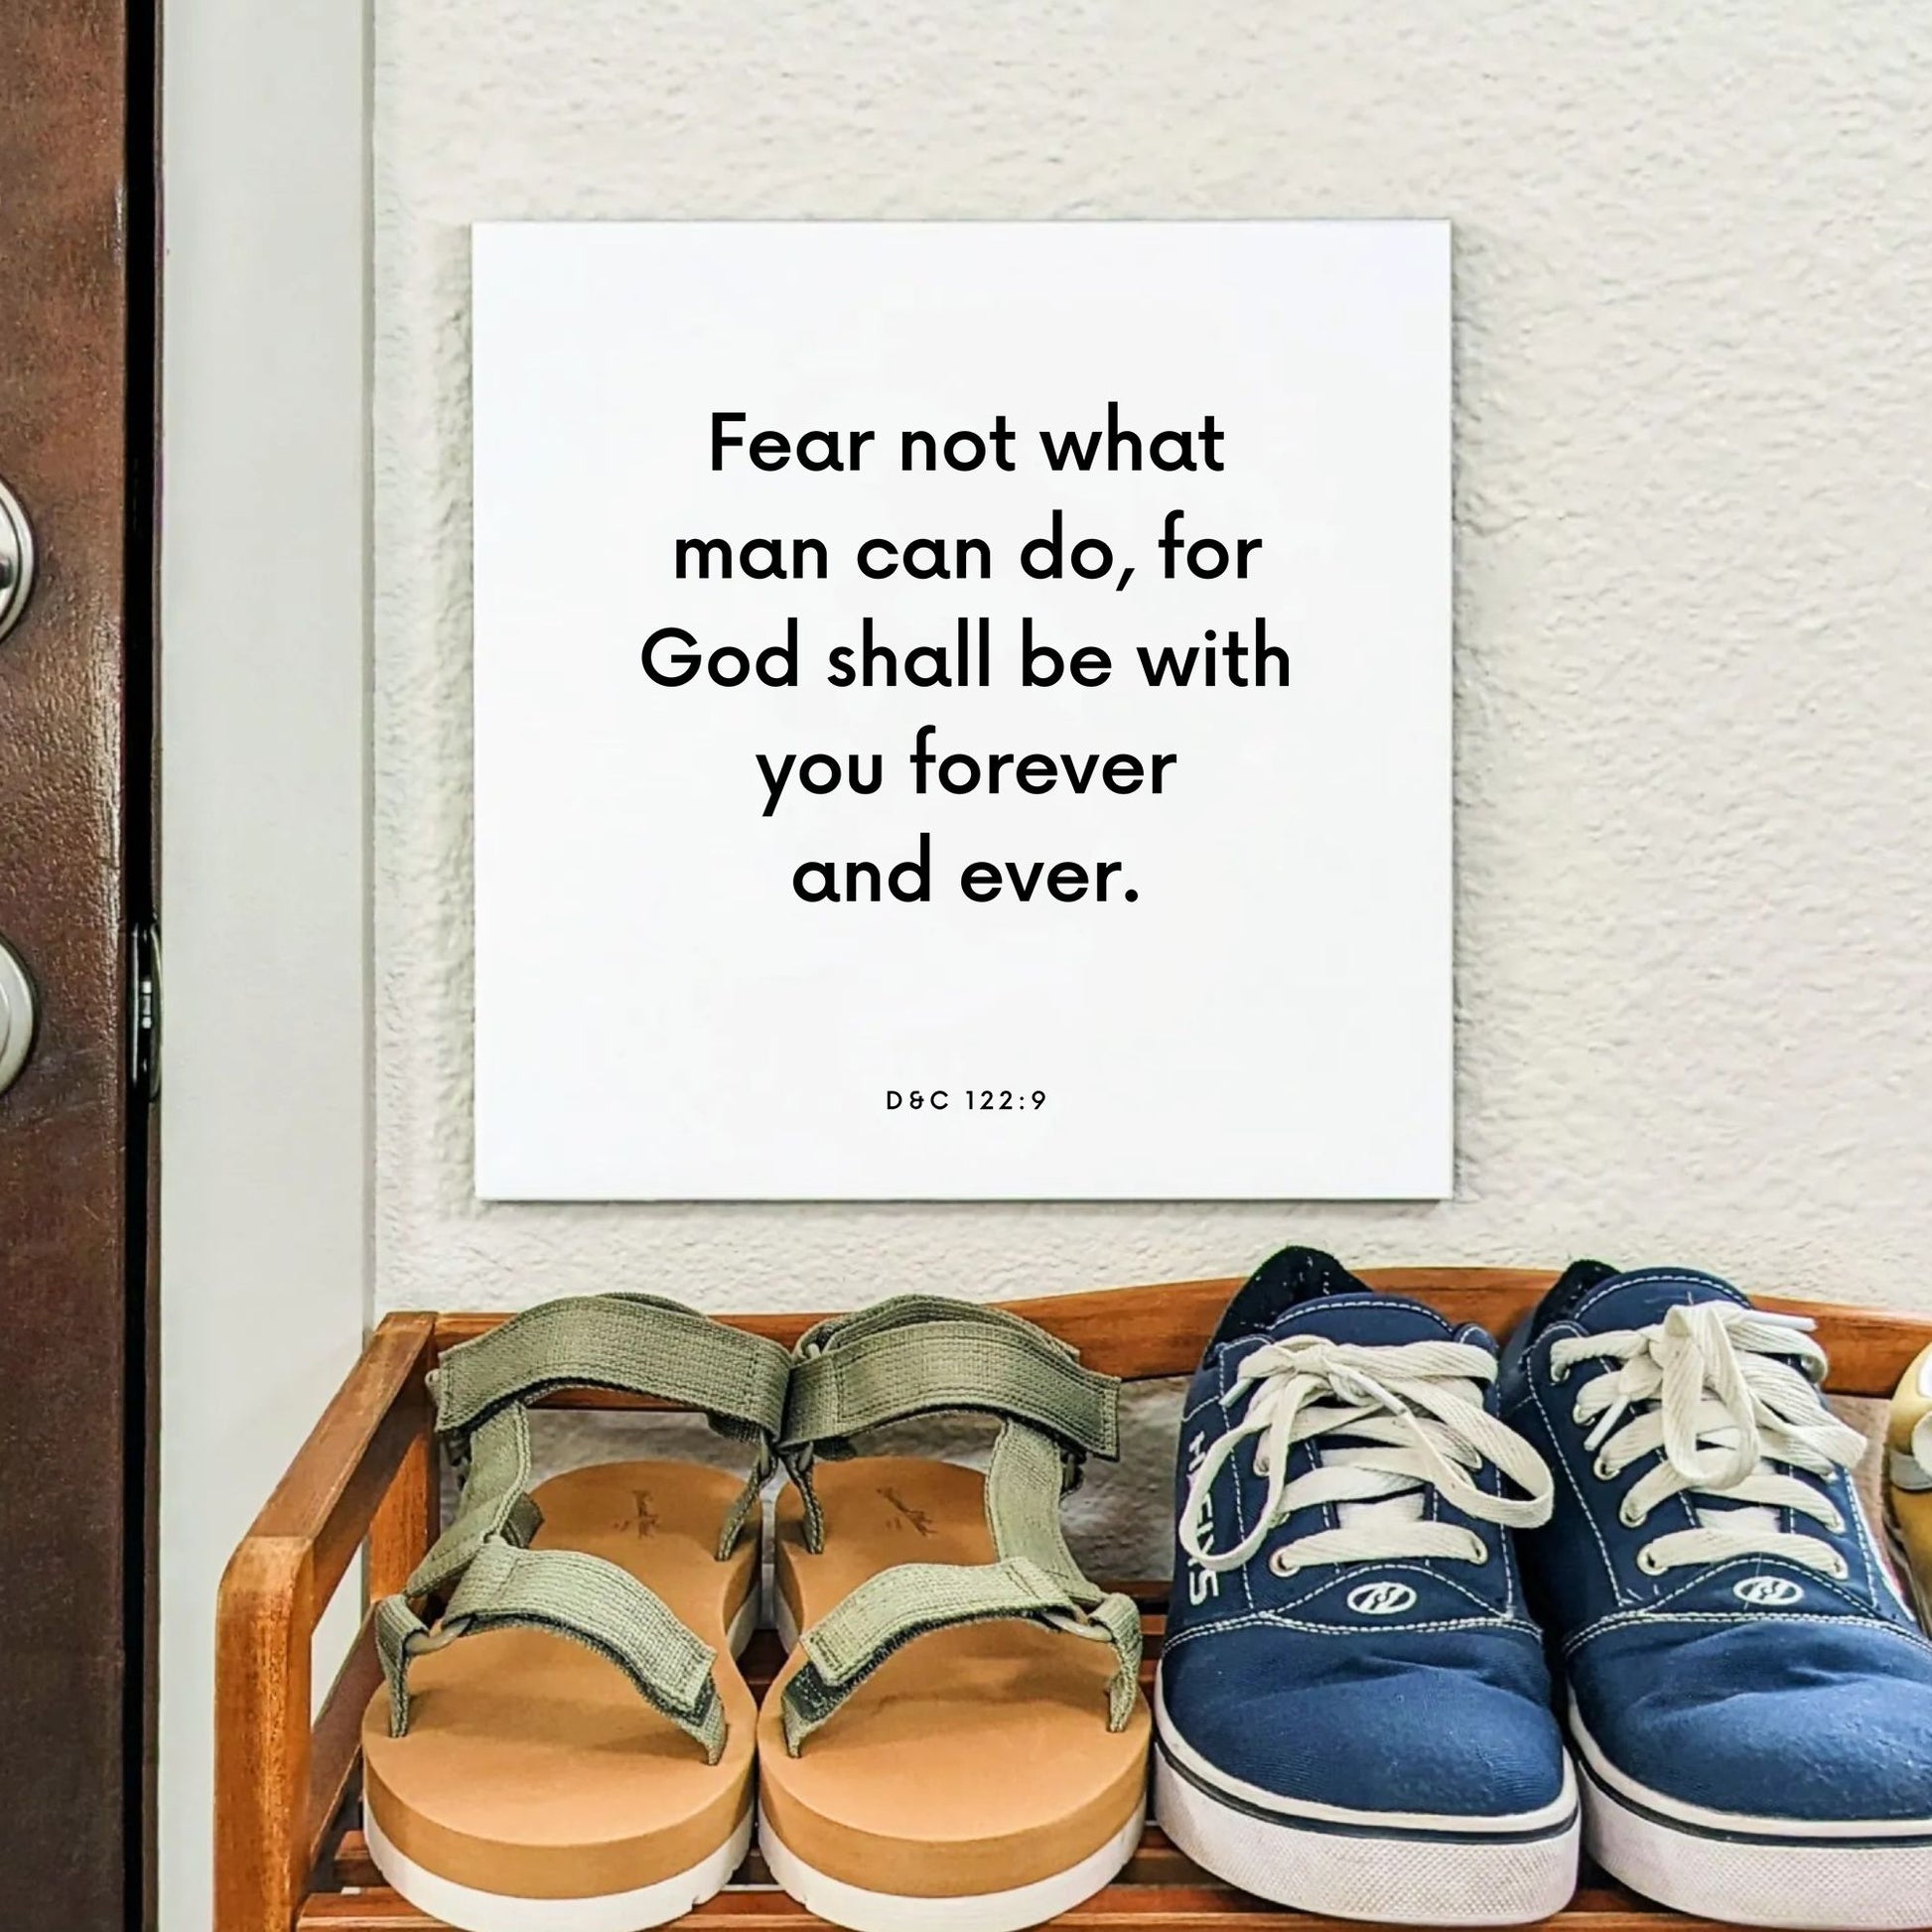 Shoes mouting of the scripture tile for D&C 122:9 - "Fear not what man can do"